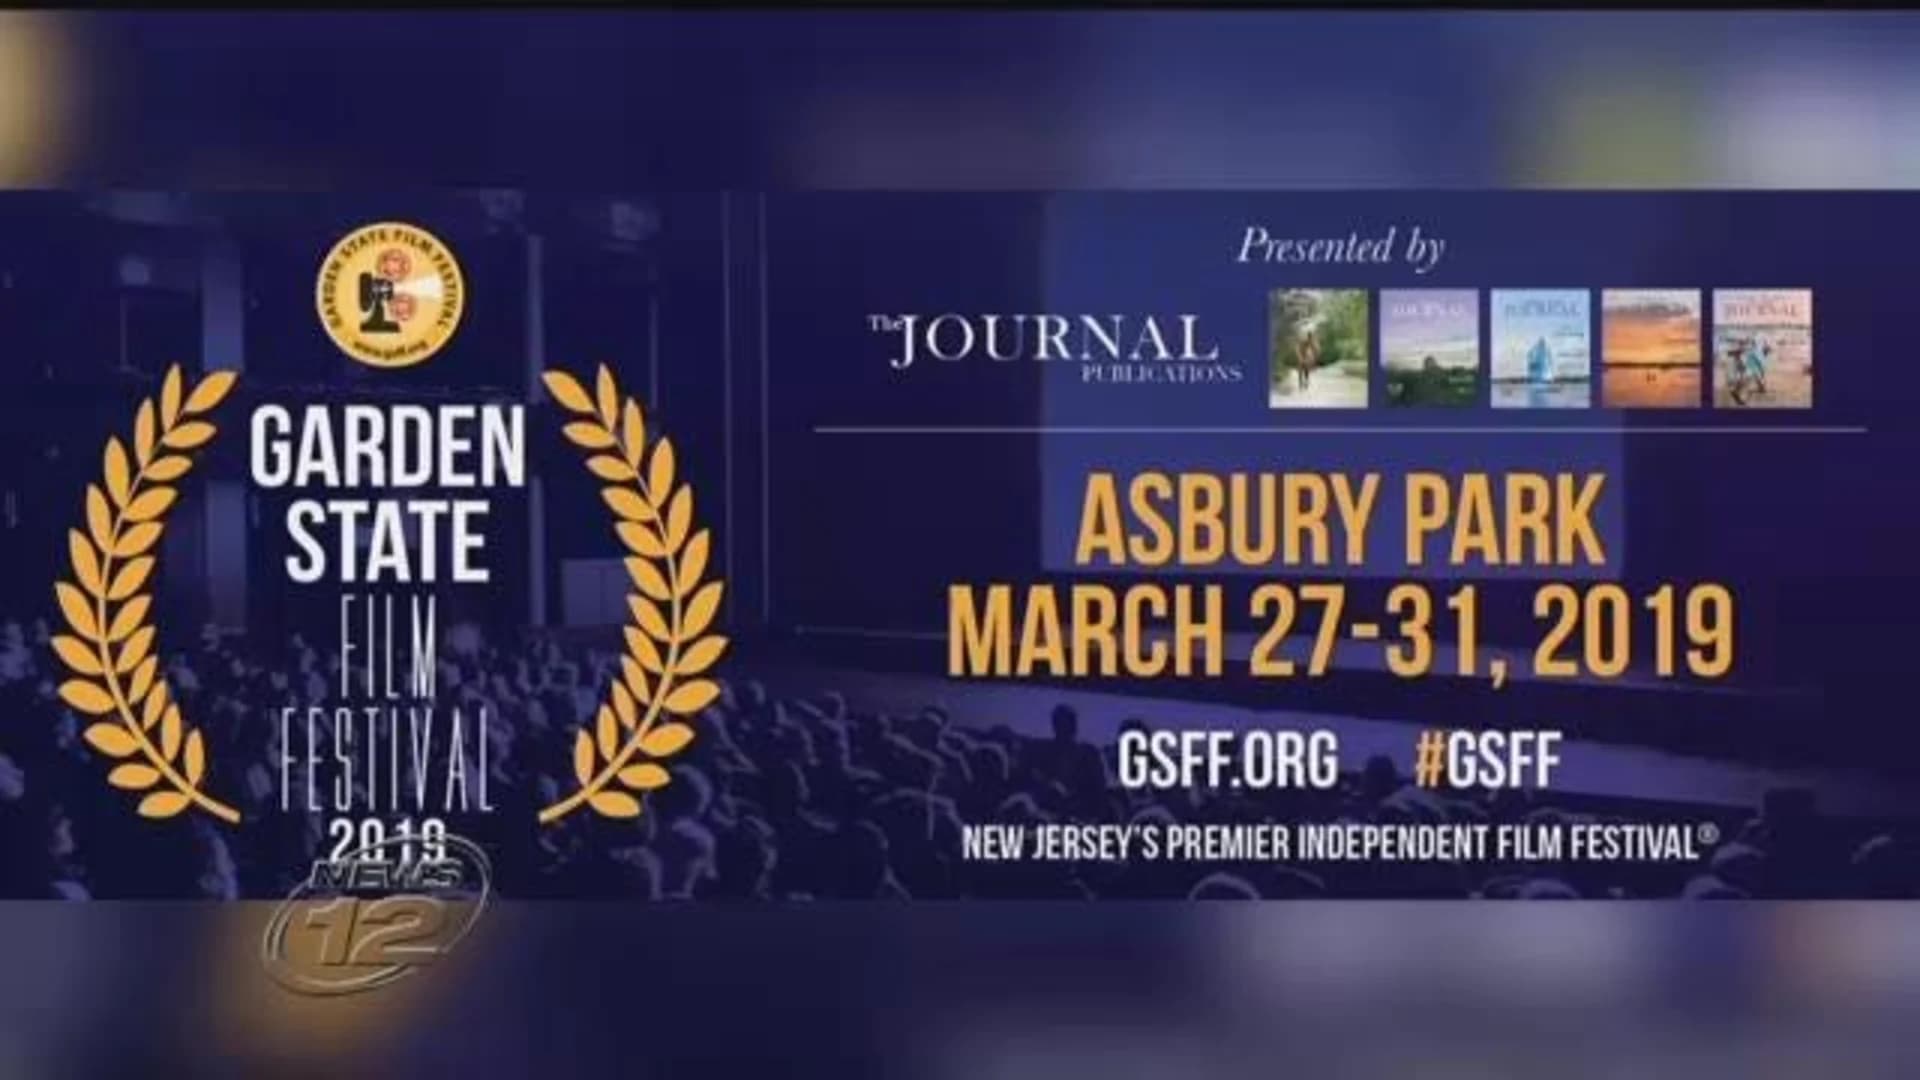 17th annual Garden State Film Festival takes place in Asbury Park